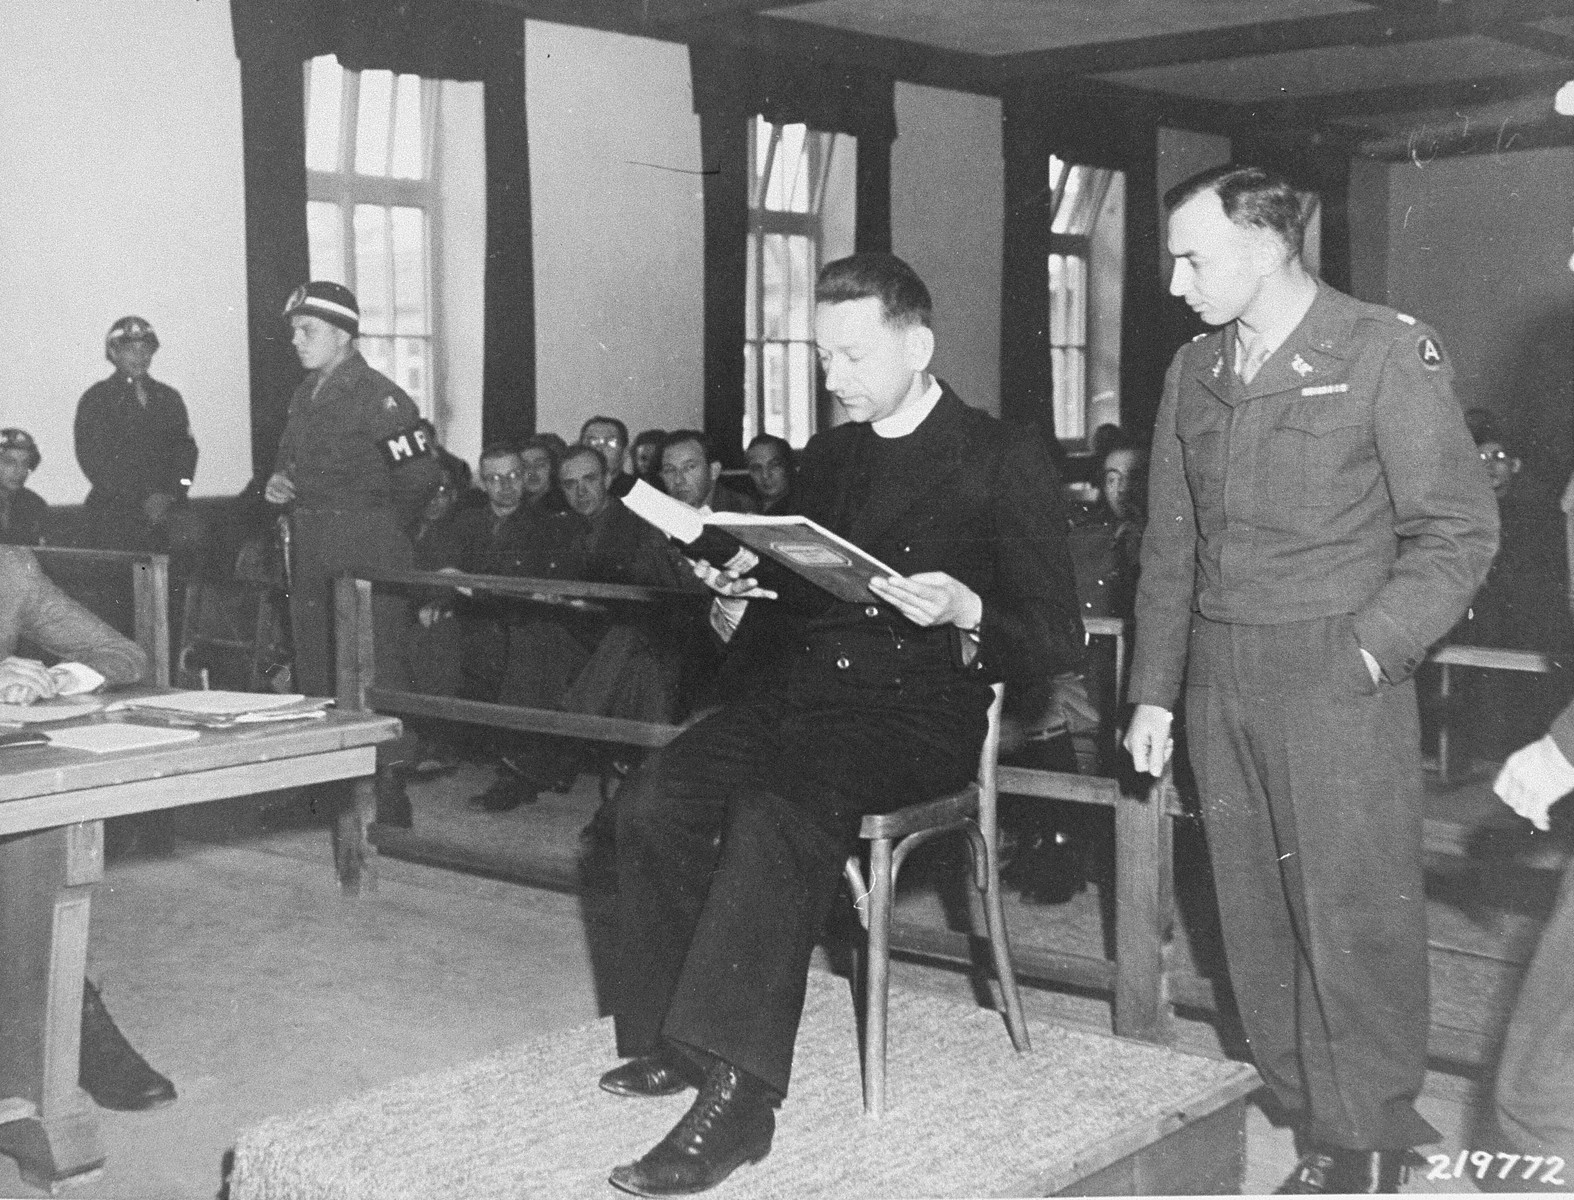 Polish priest Theodore Korcz reads to Lt. Colonel William Denson from a camp medical record presented as evidence at the trial of former camp personnel and prisoners from Dachau.  

The log recorded the deaths of several Catholic priests who were used as subjects in malaria experiments.